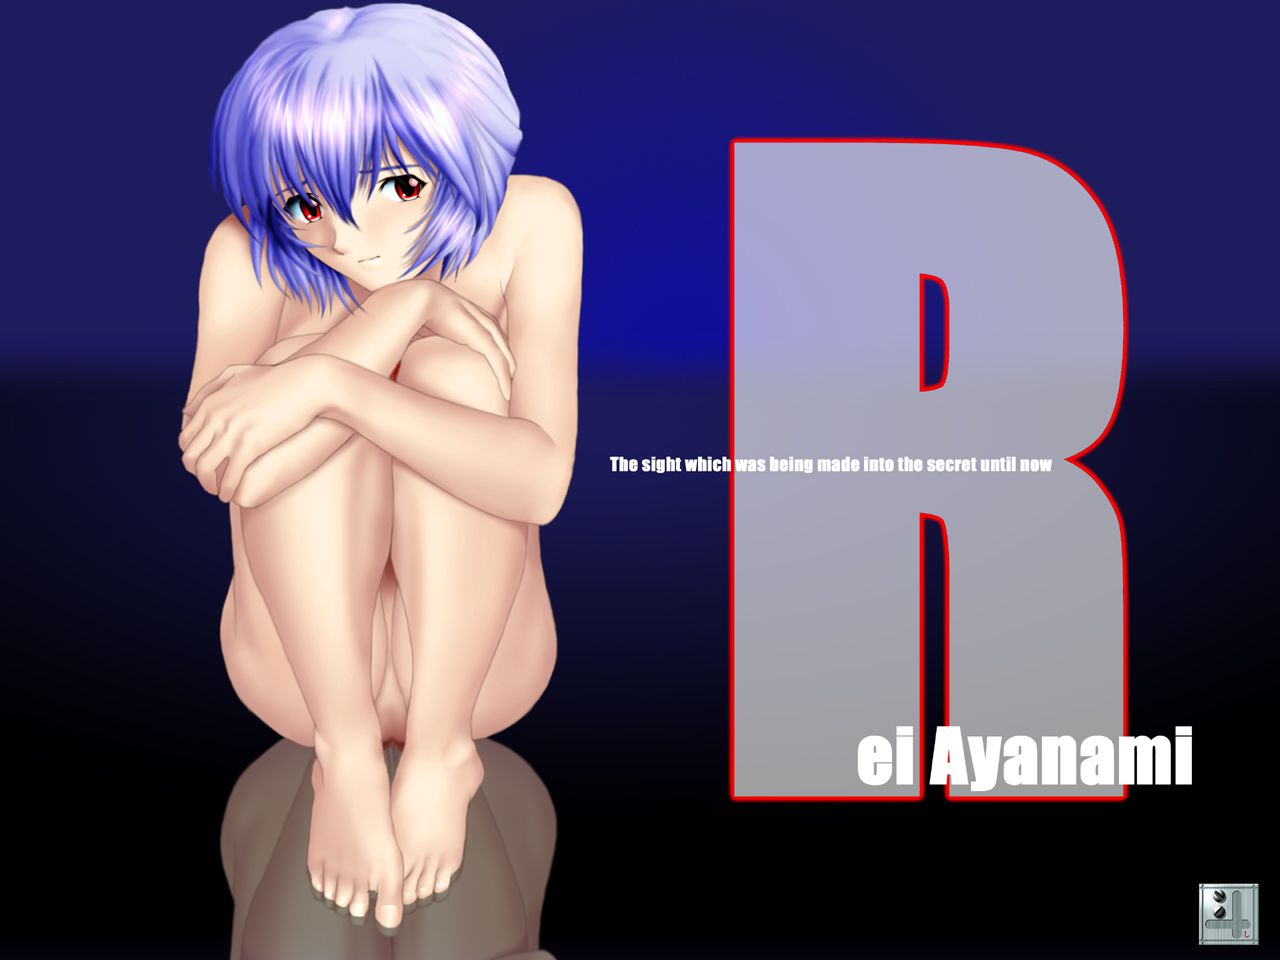 [yadorigi] The sight which was being made into the secret until now Rei ayanami 1